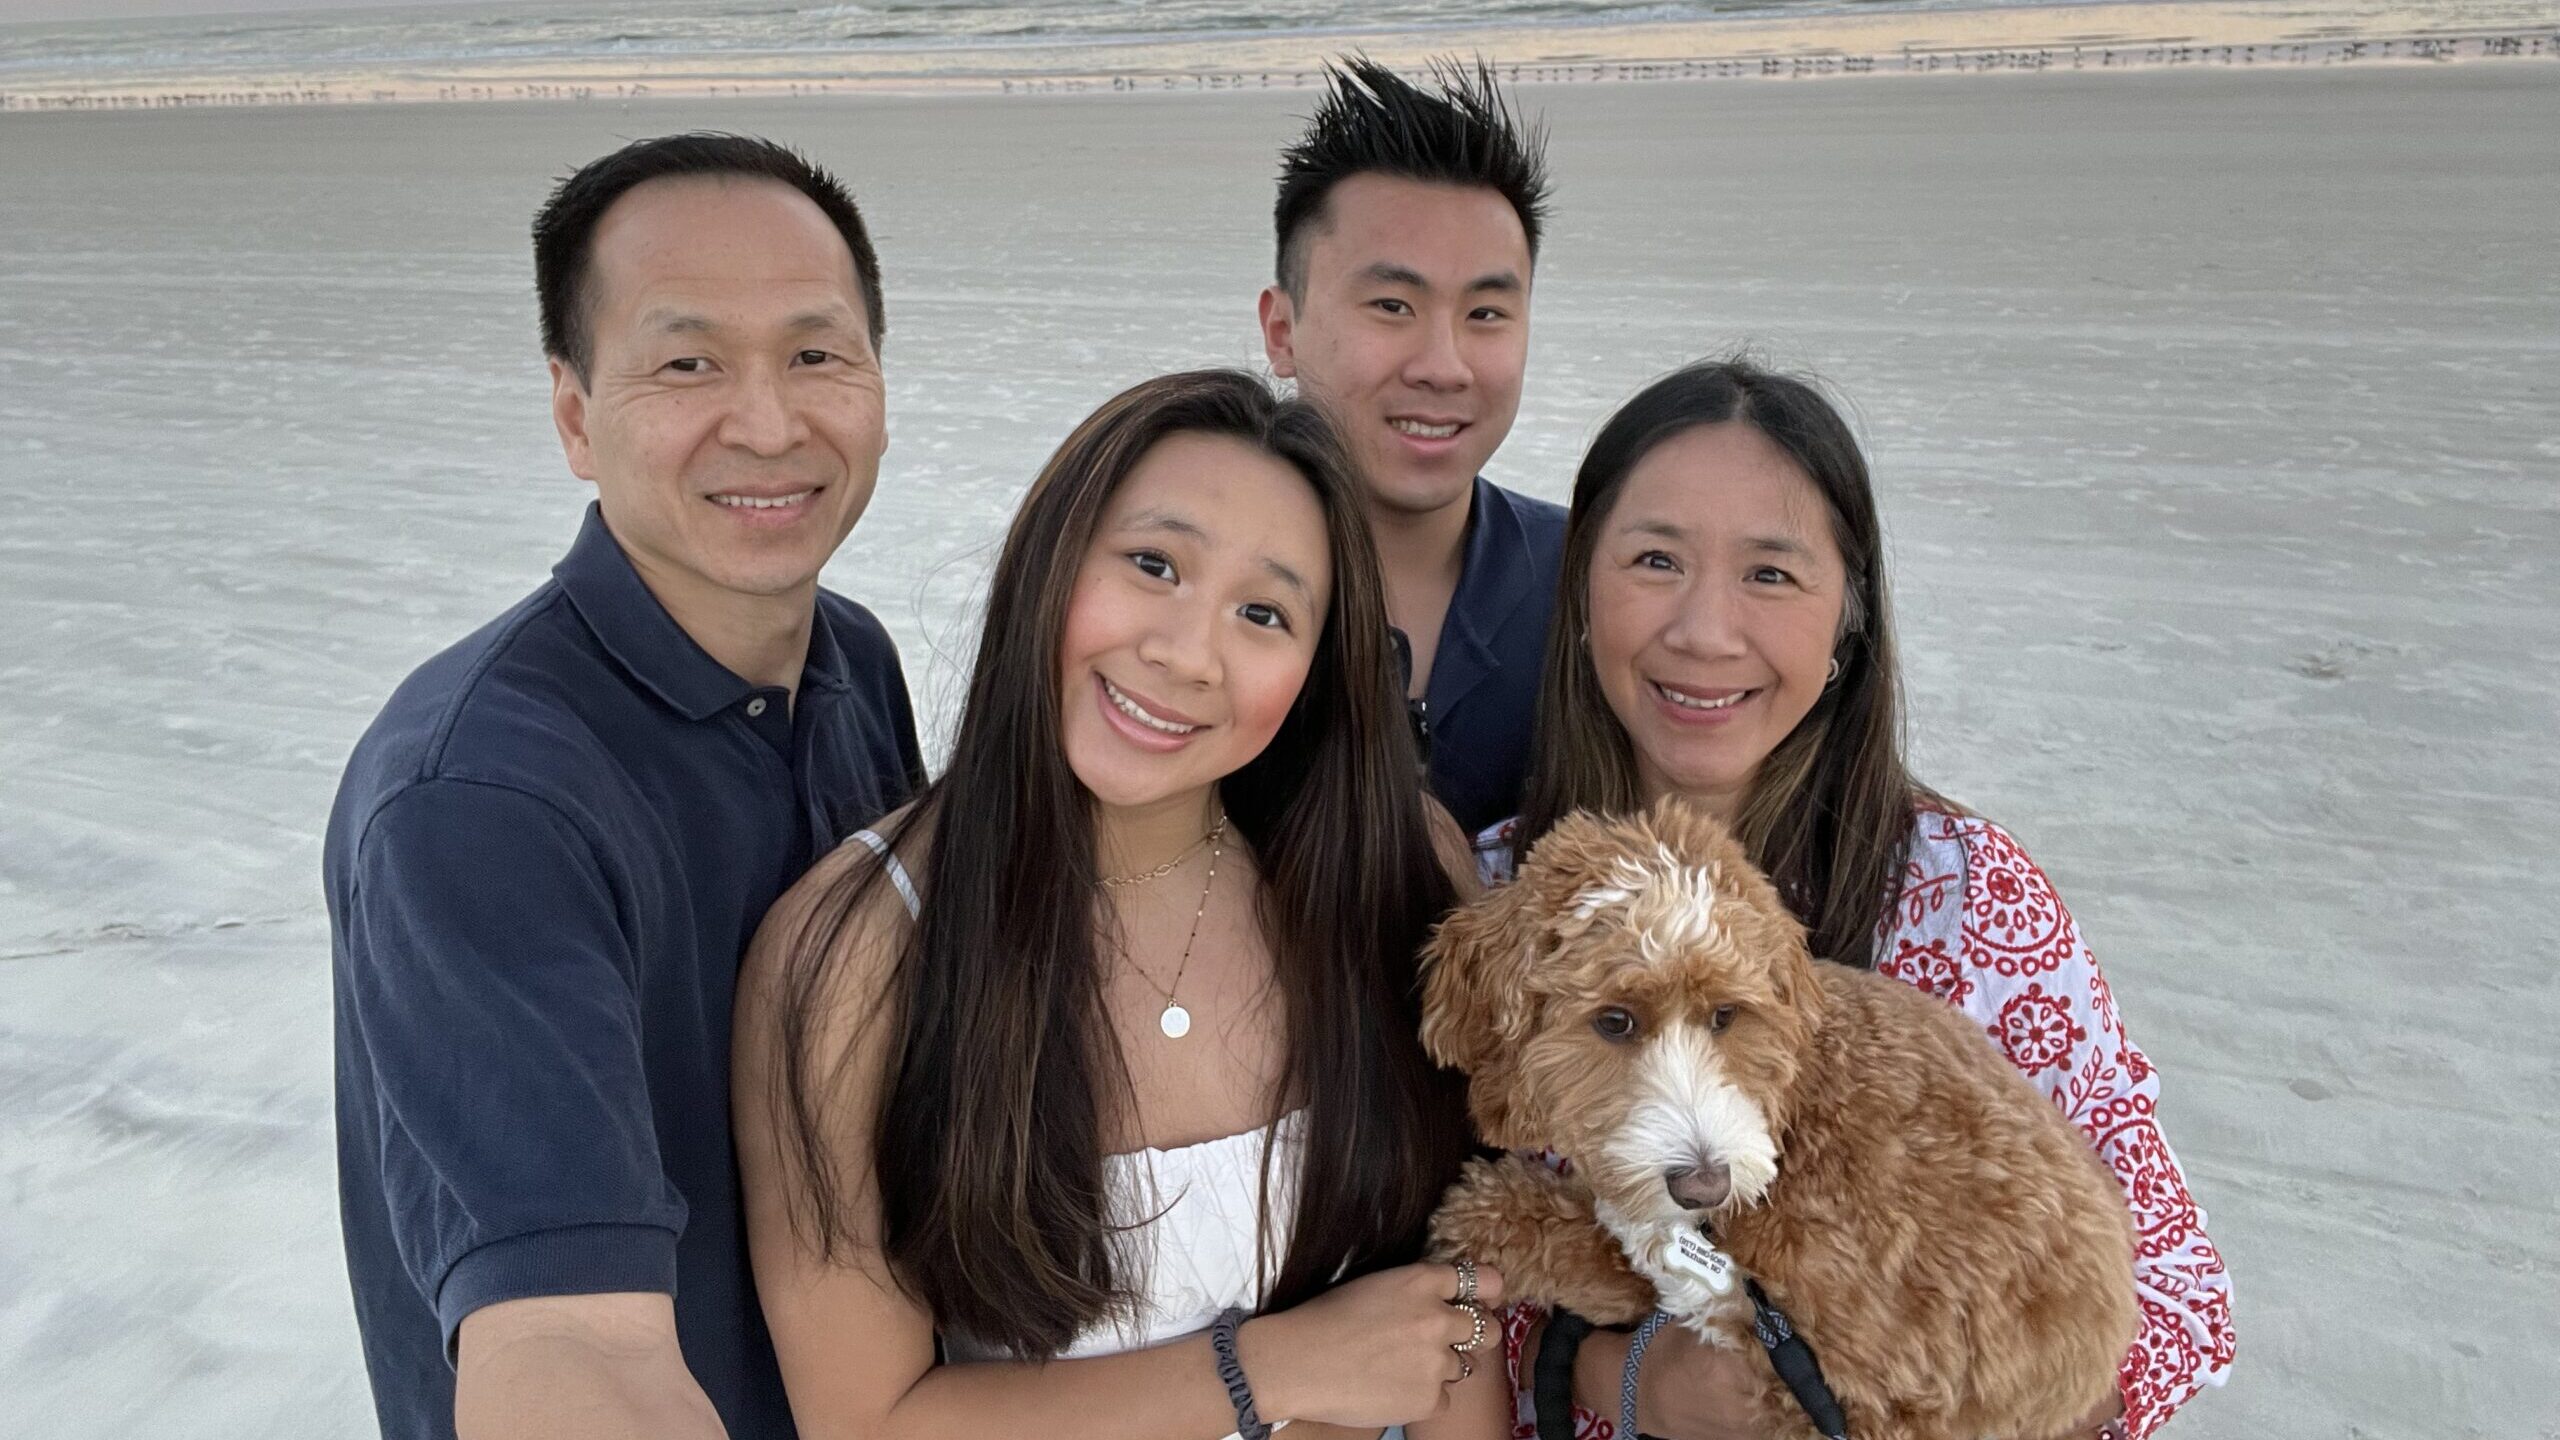 The Chin family with Max at the beach over Christmas 2021